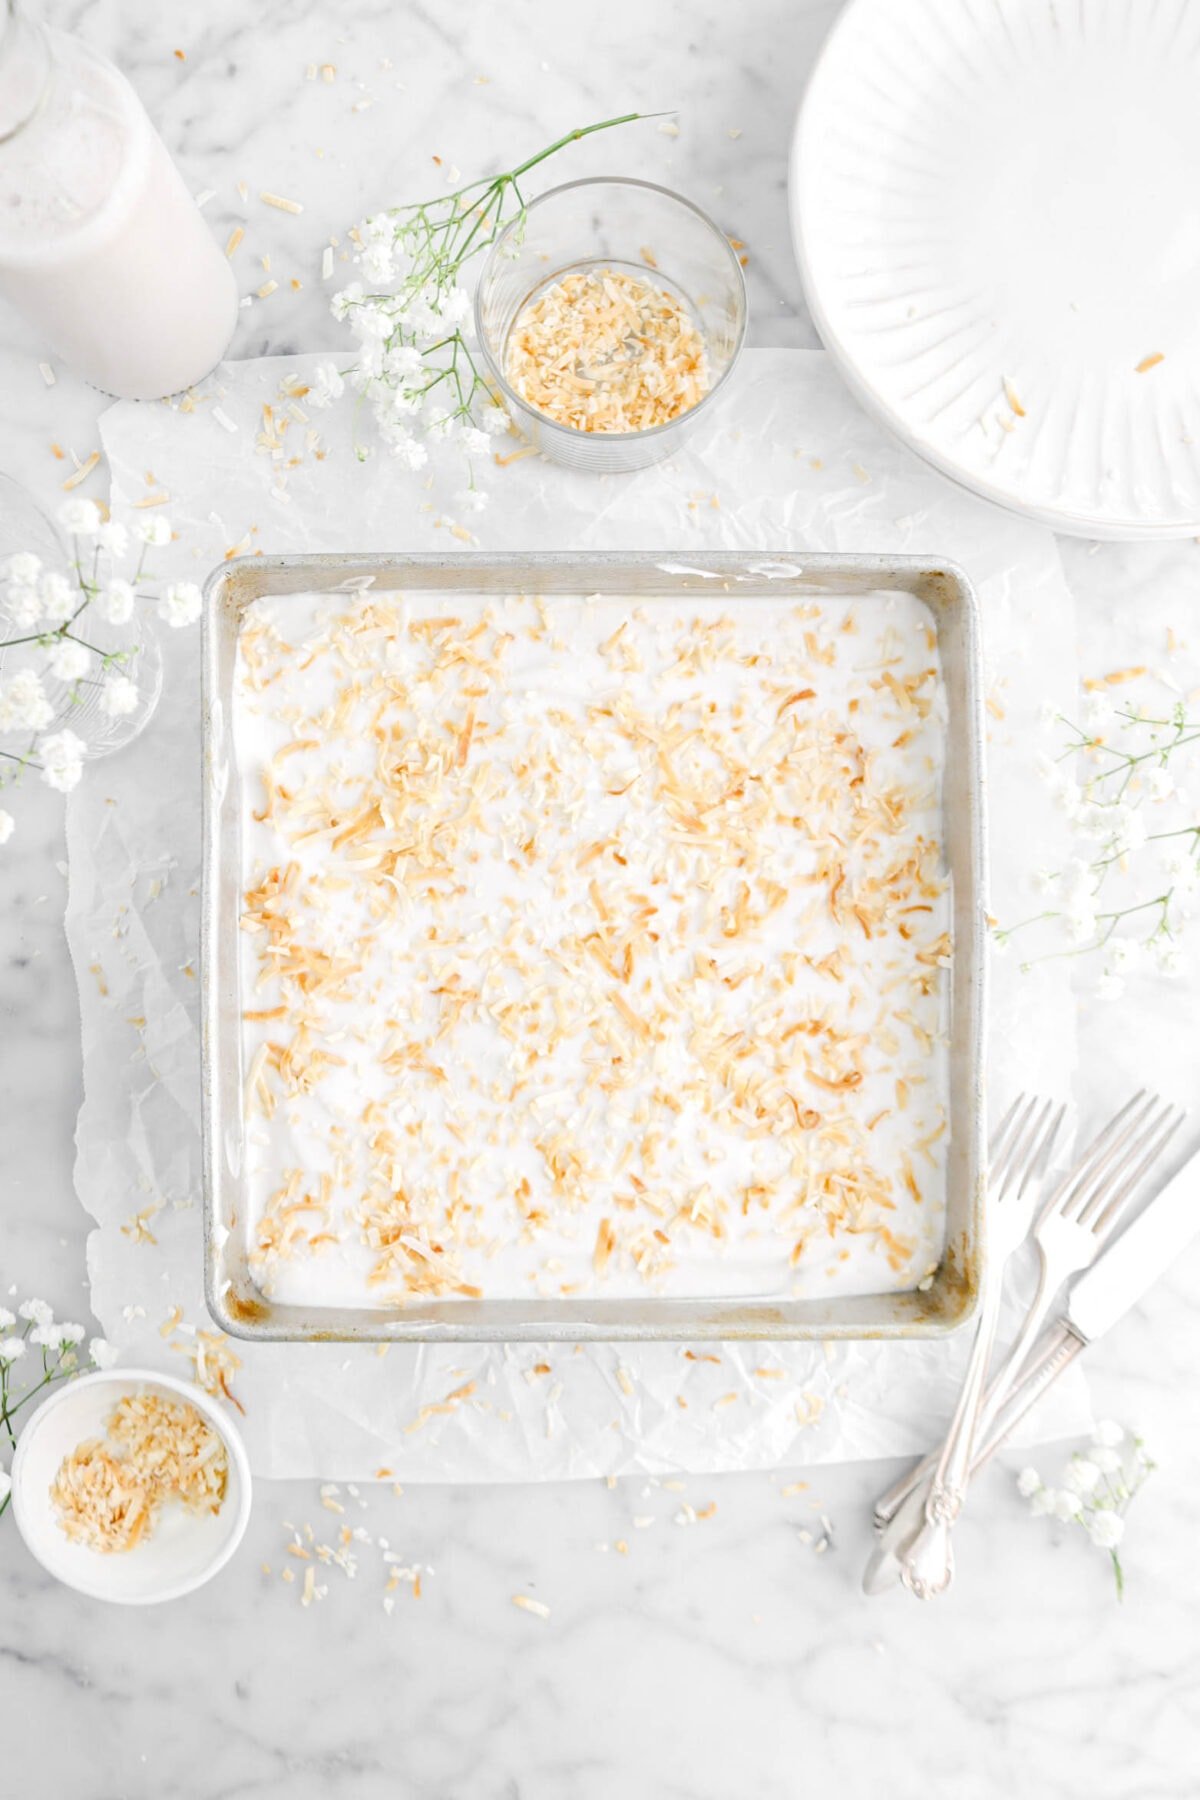 cake with whipped cream and toasted coconut on top in square cake pan on parchment paper with toasted coconut around, flowers, forks, and plates on marble surface